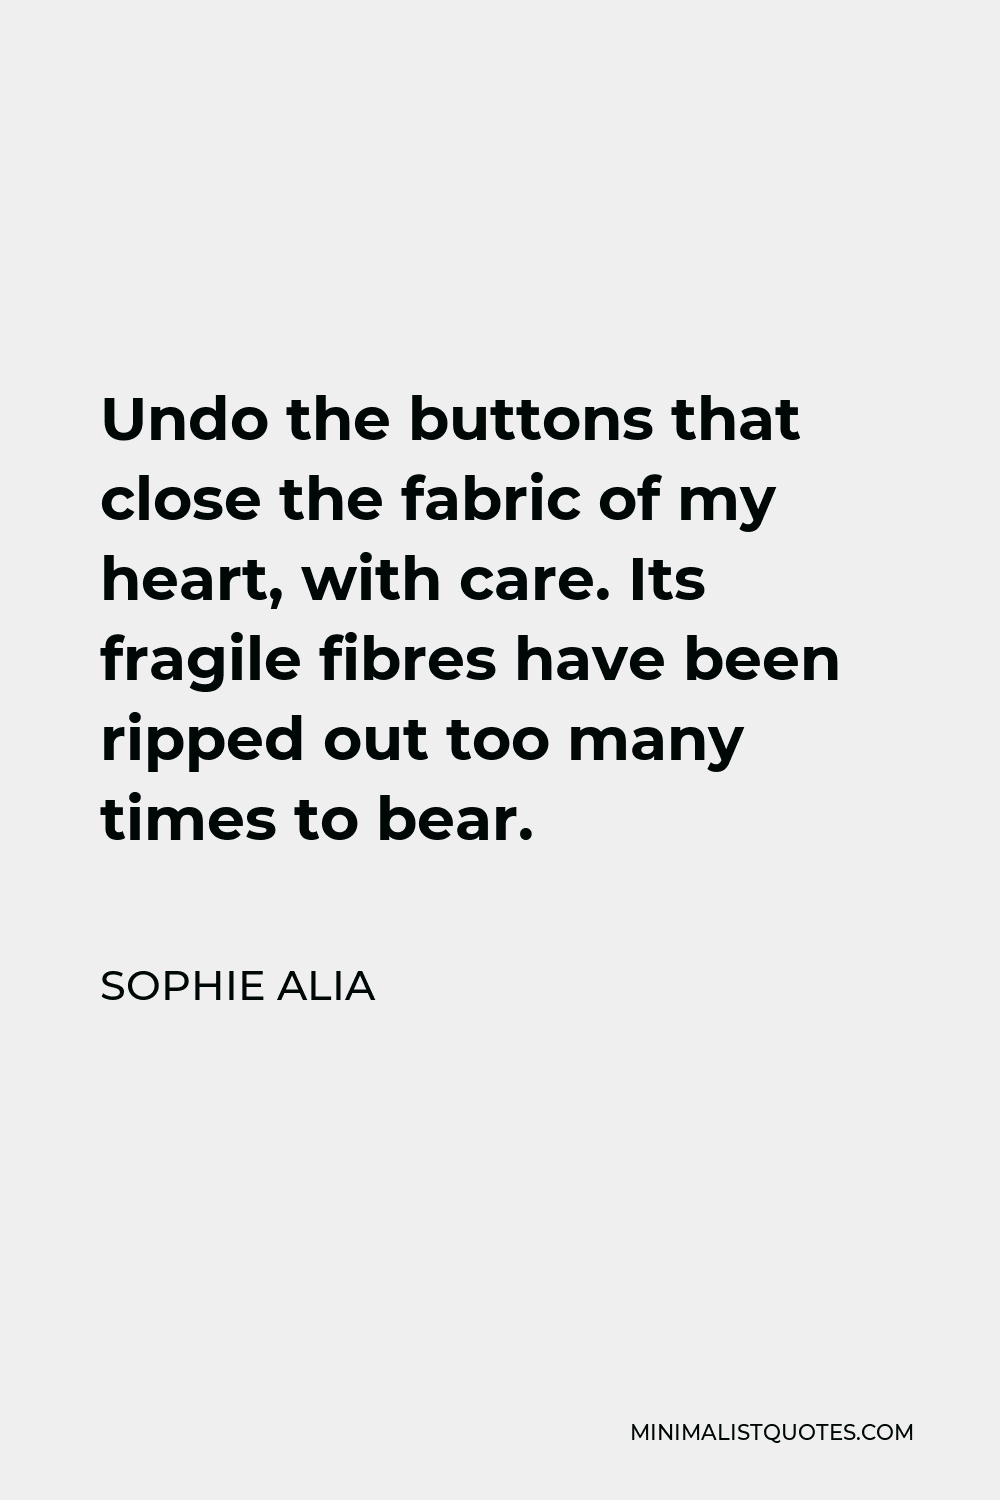 Sophie Alia Quote - Undo the buttons that close the fabric of my heart, with care. Its fragile fibres have been ripped out too many times to bear.